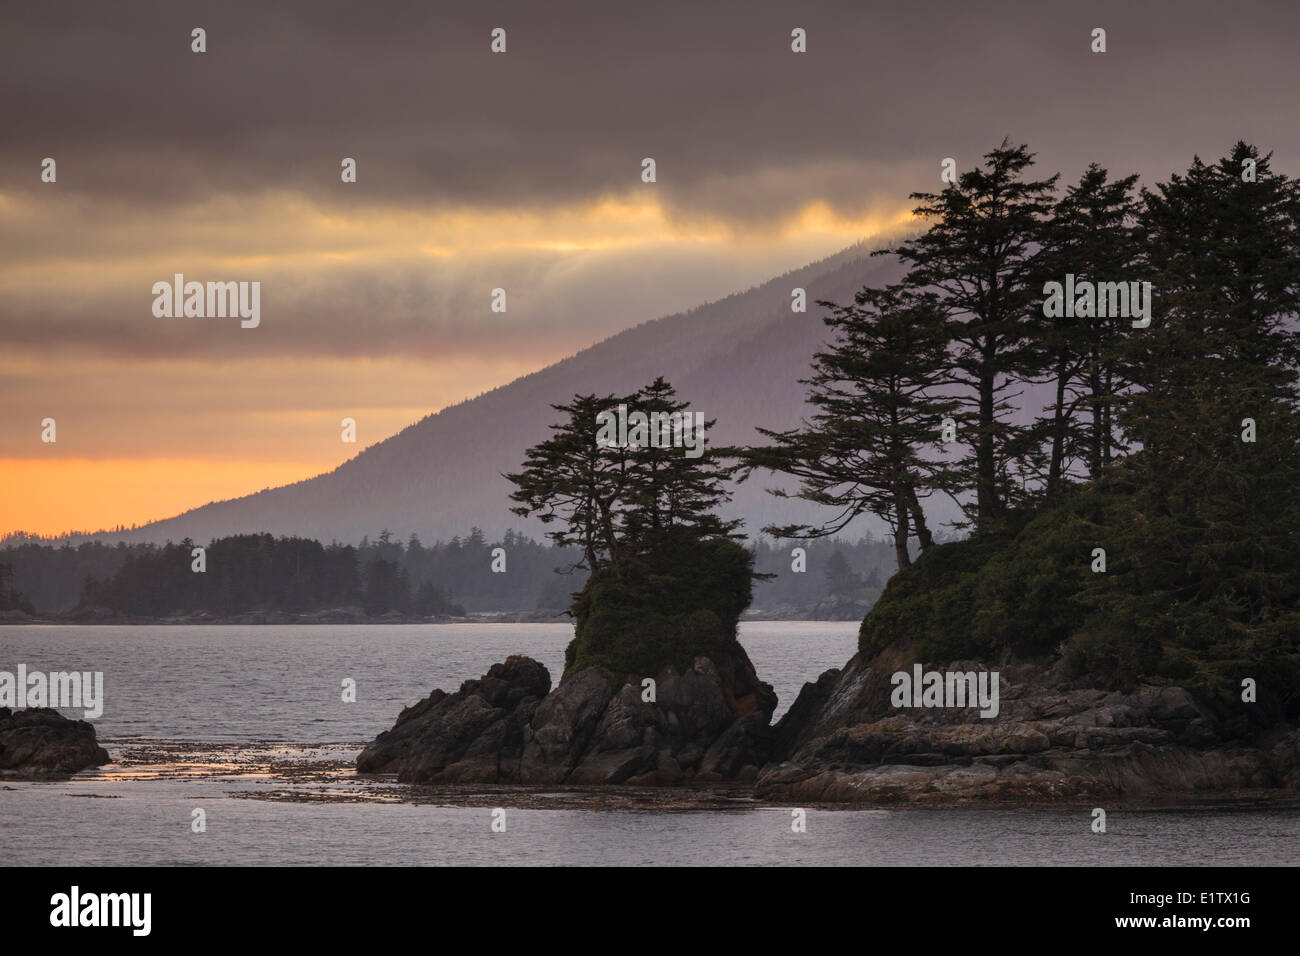 Evening light illuminates an islet off the shore of Flores Island in Clayoquot Sound British Columbia, Canada. Stock Photo